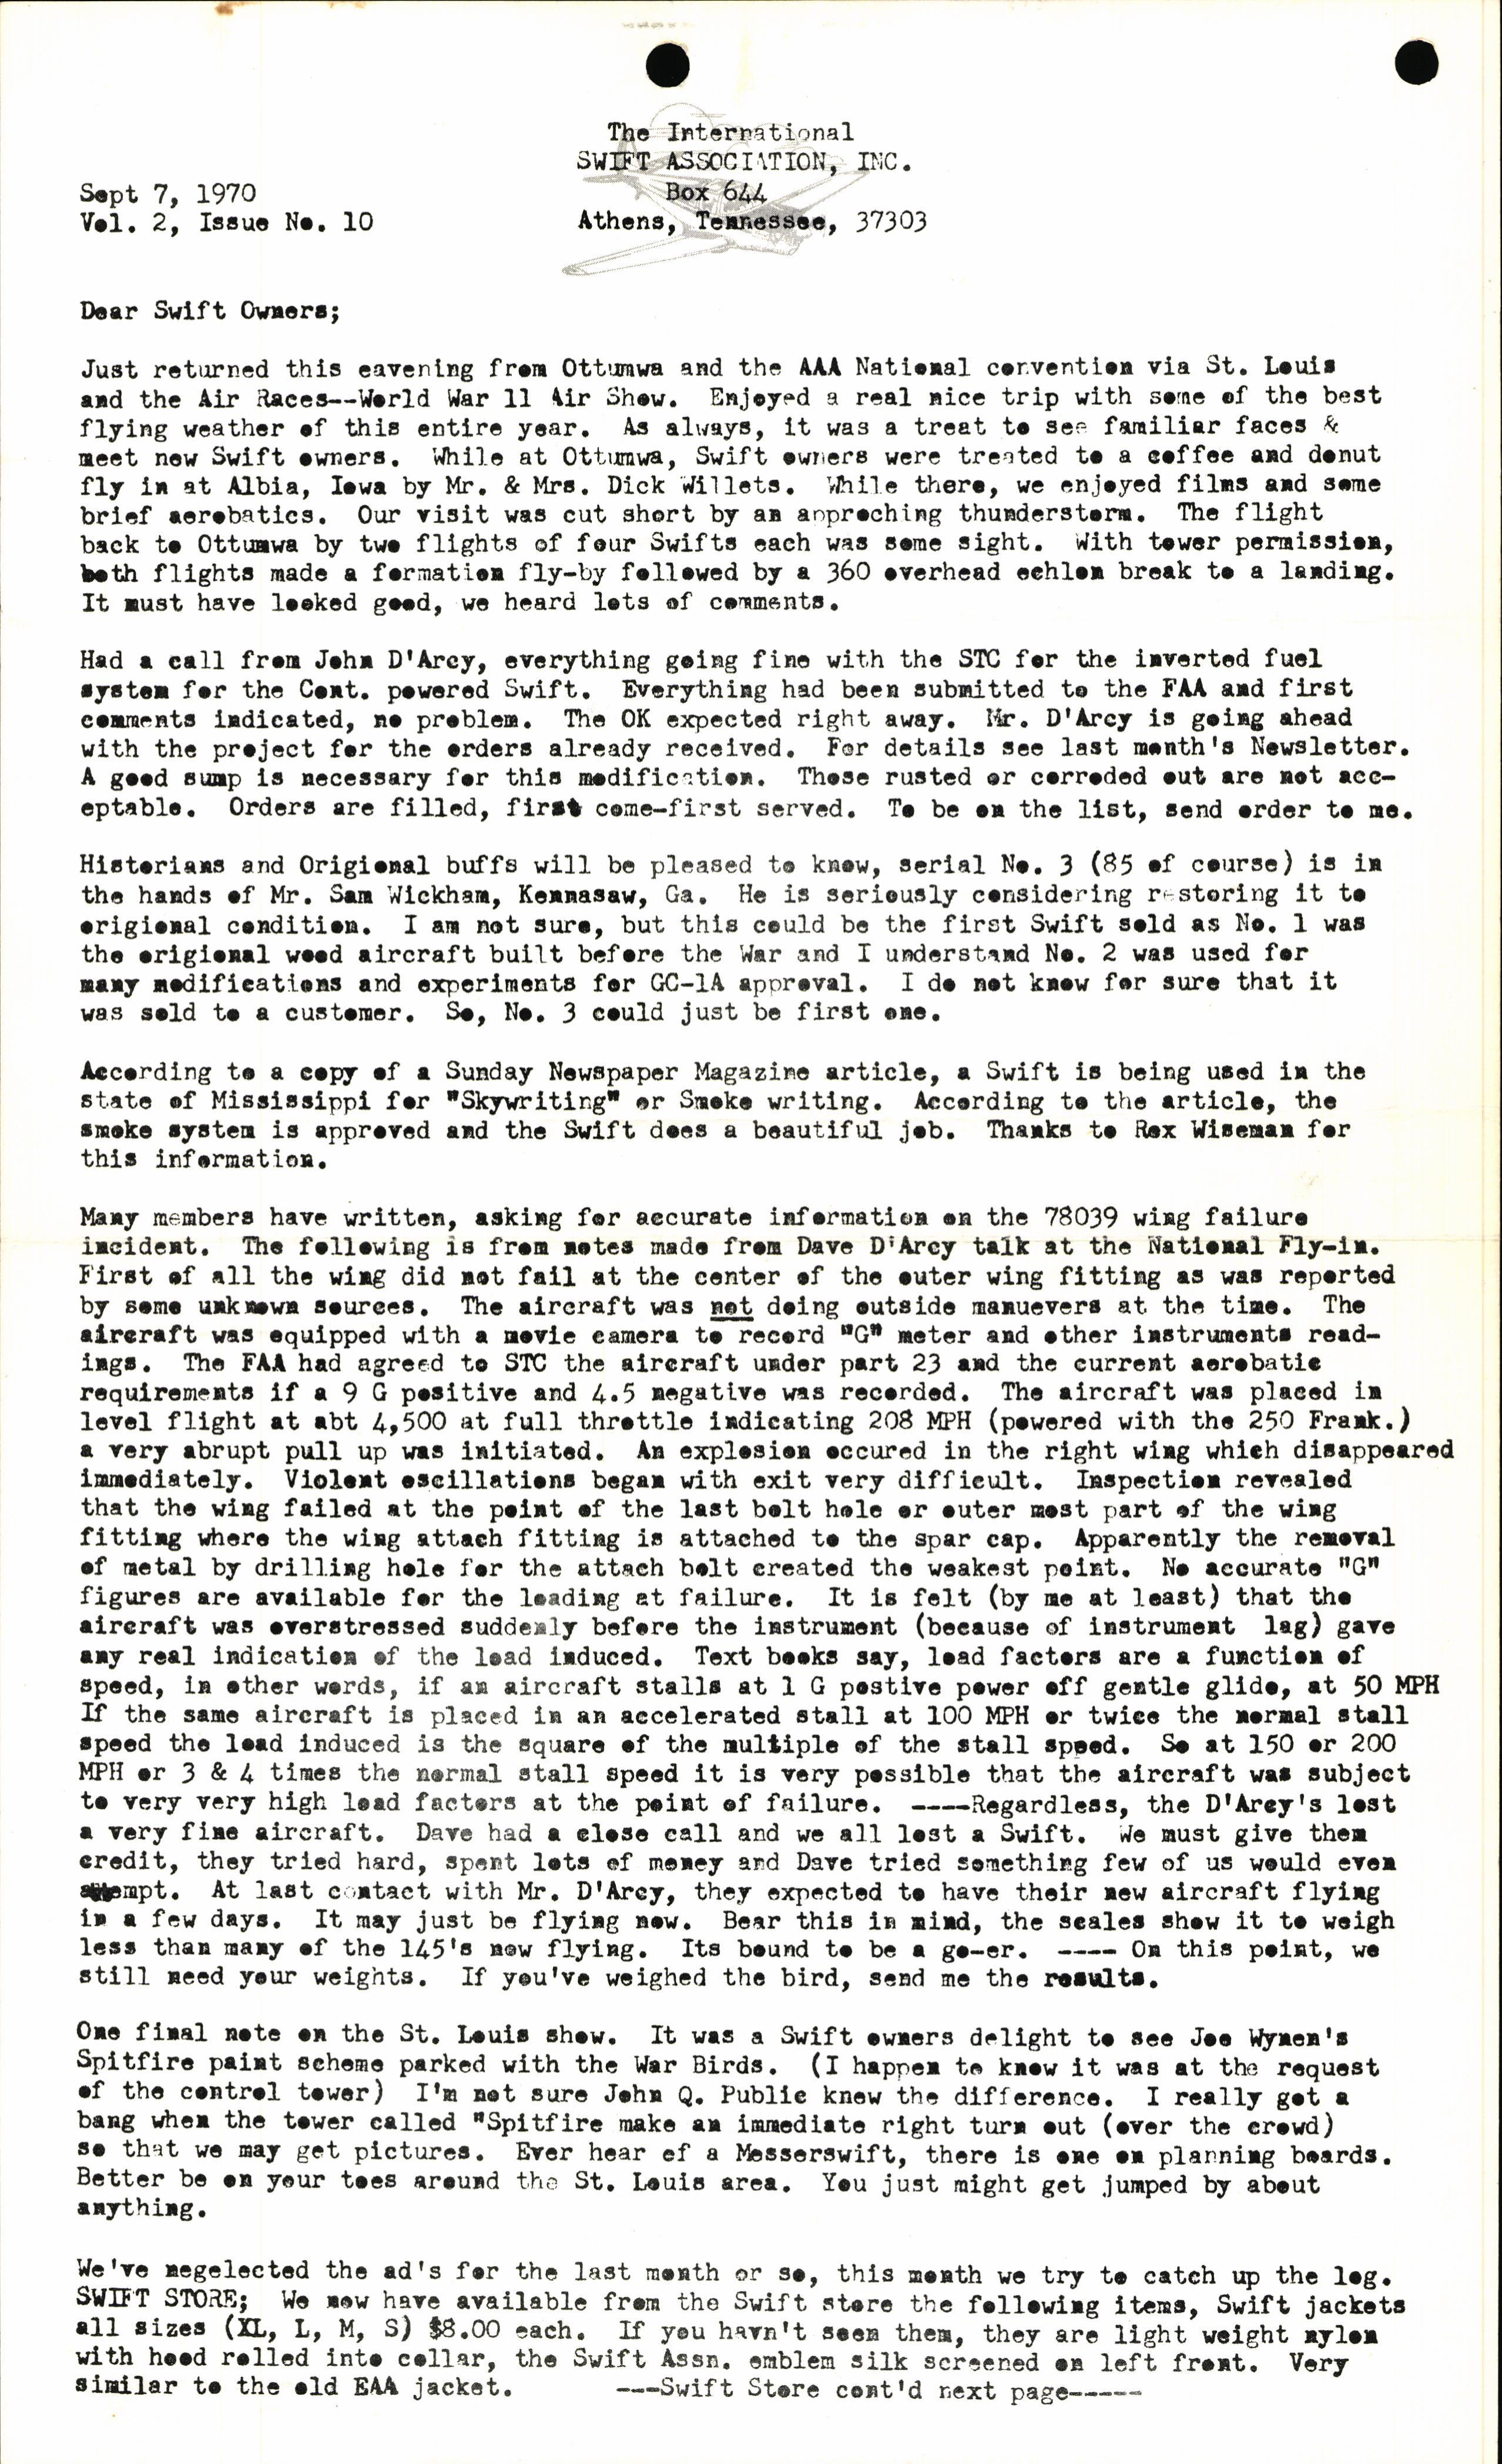 Sample page 1 from AirCorps Library document: September 1970